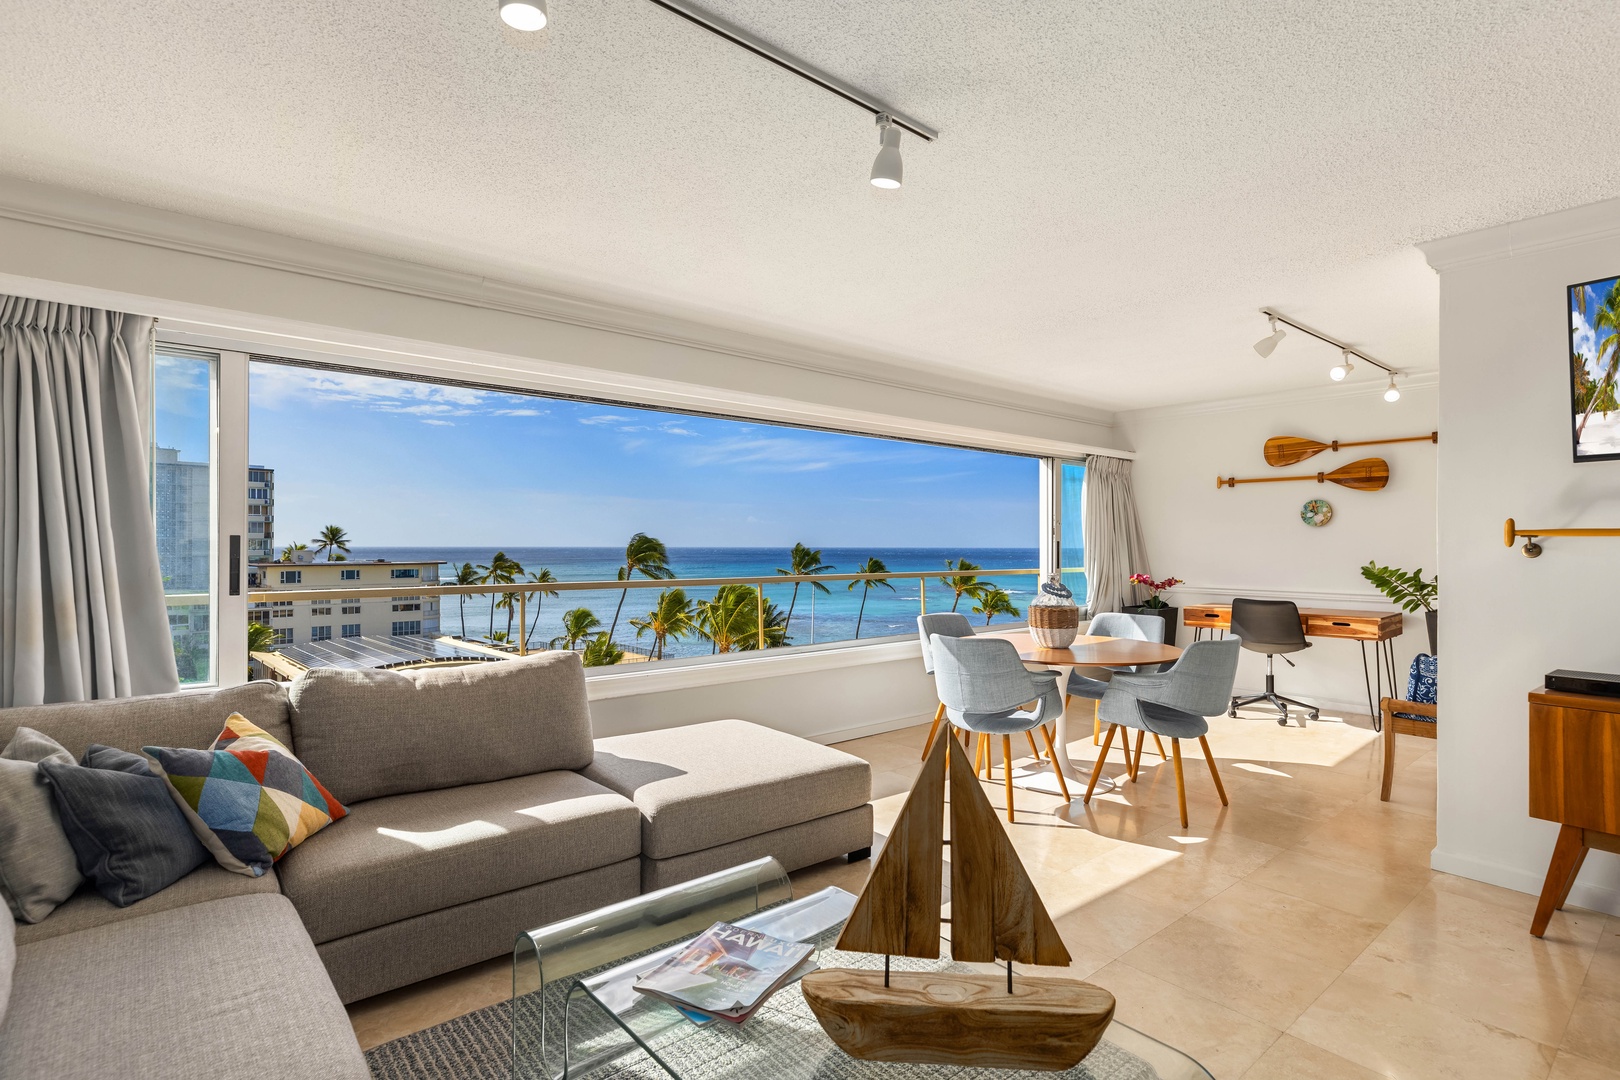 Honolulu Vacation Rentals, Colony Surf Getaway - Plush sofas with open and airy living space, welcoming the island breeze.